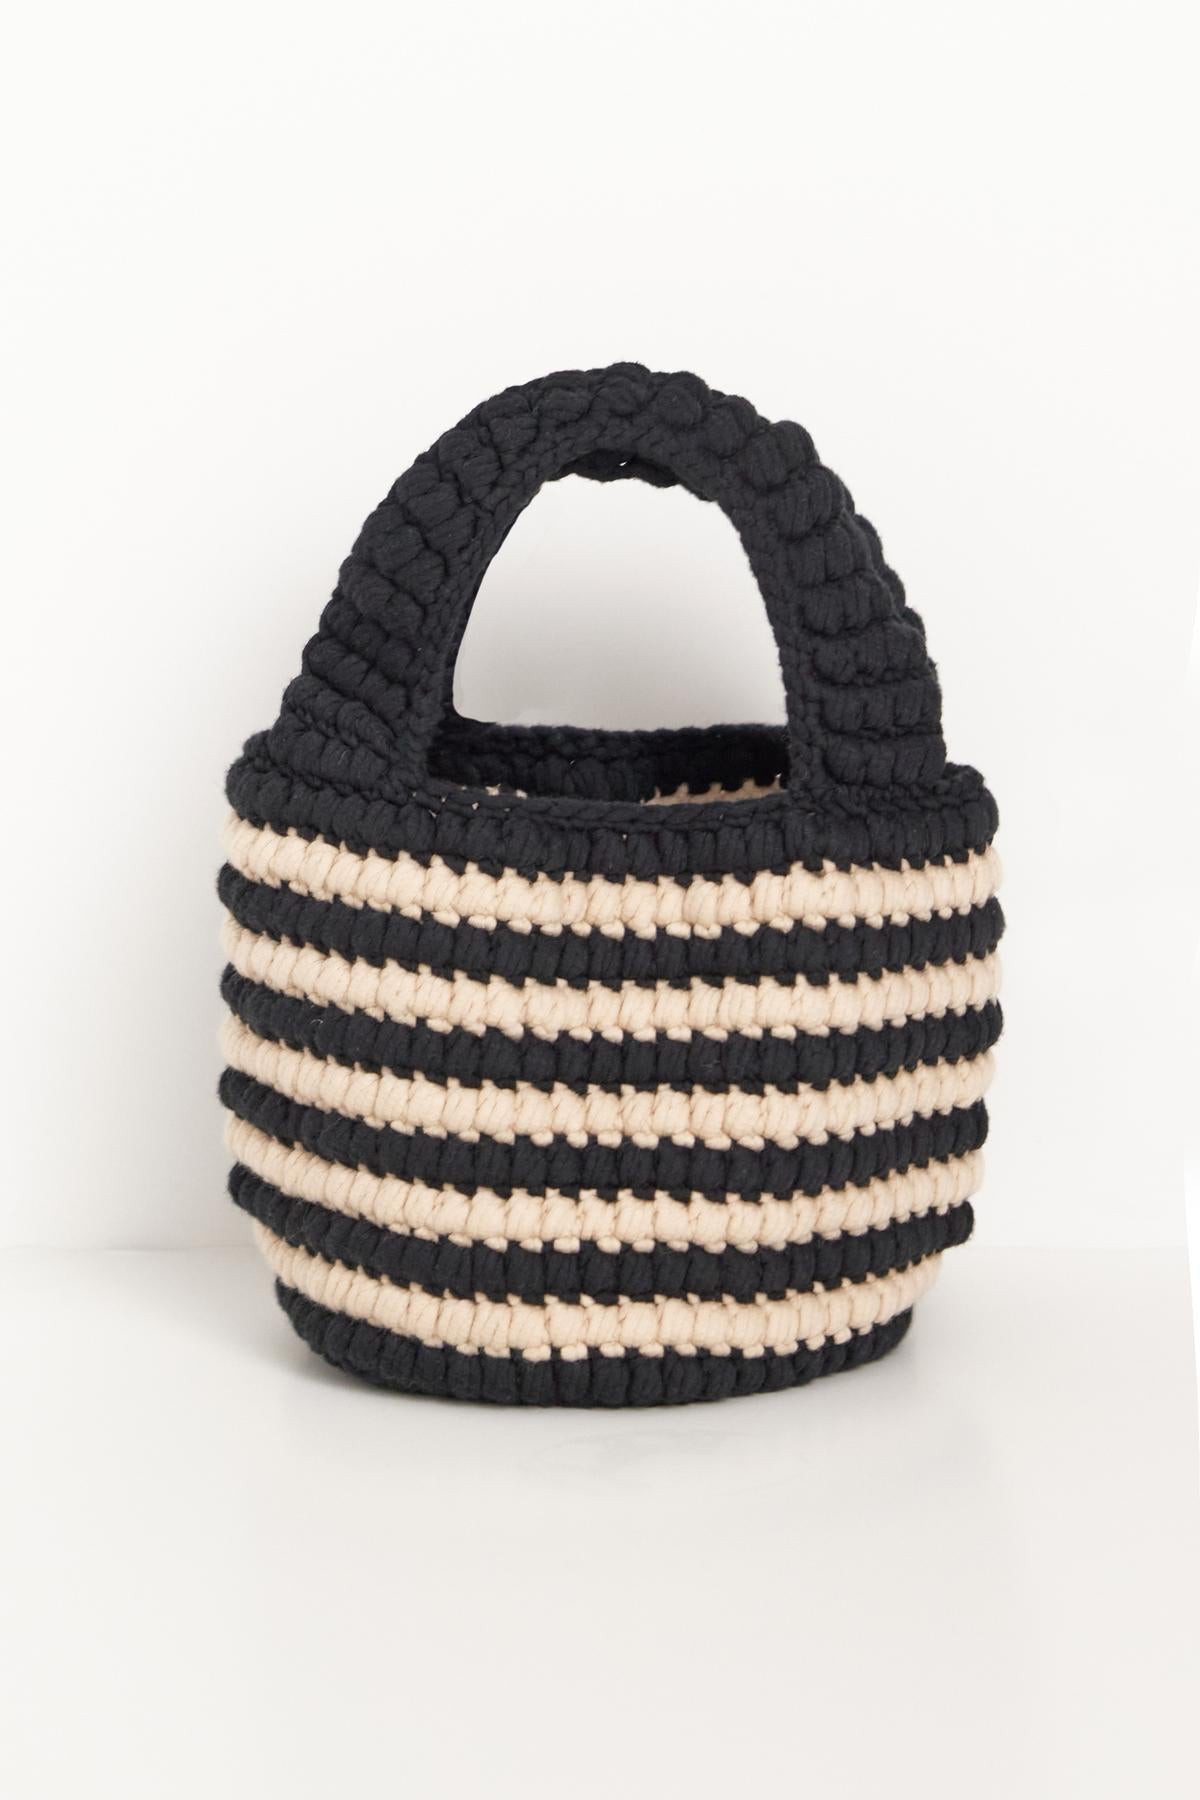   A handmade KNOX BAG crochet knit bag with alternating black and beige stripes, featuring a sturdy loop handle, displayed against a white background. Brand Name: Velvet by Jenny Graham 